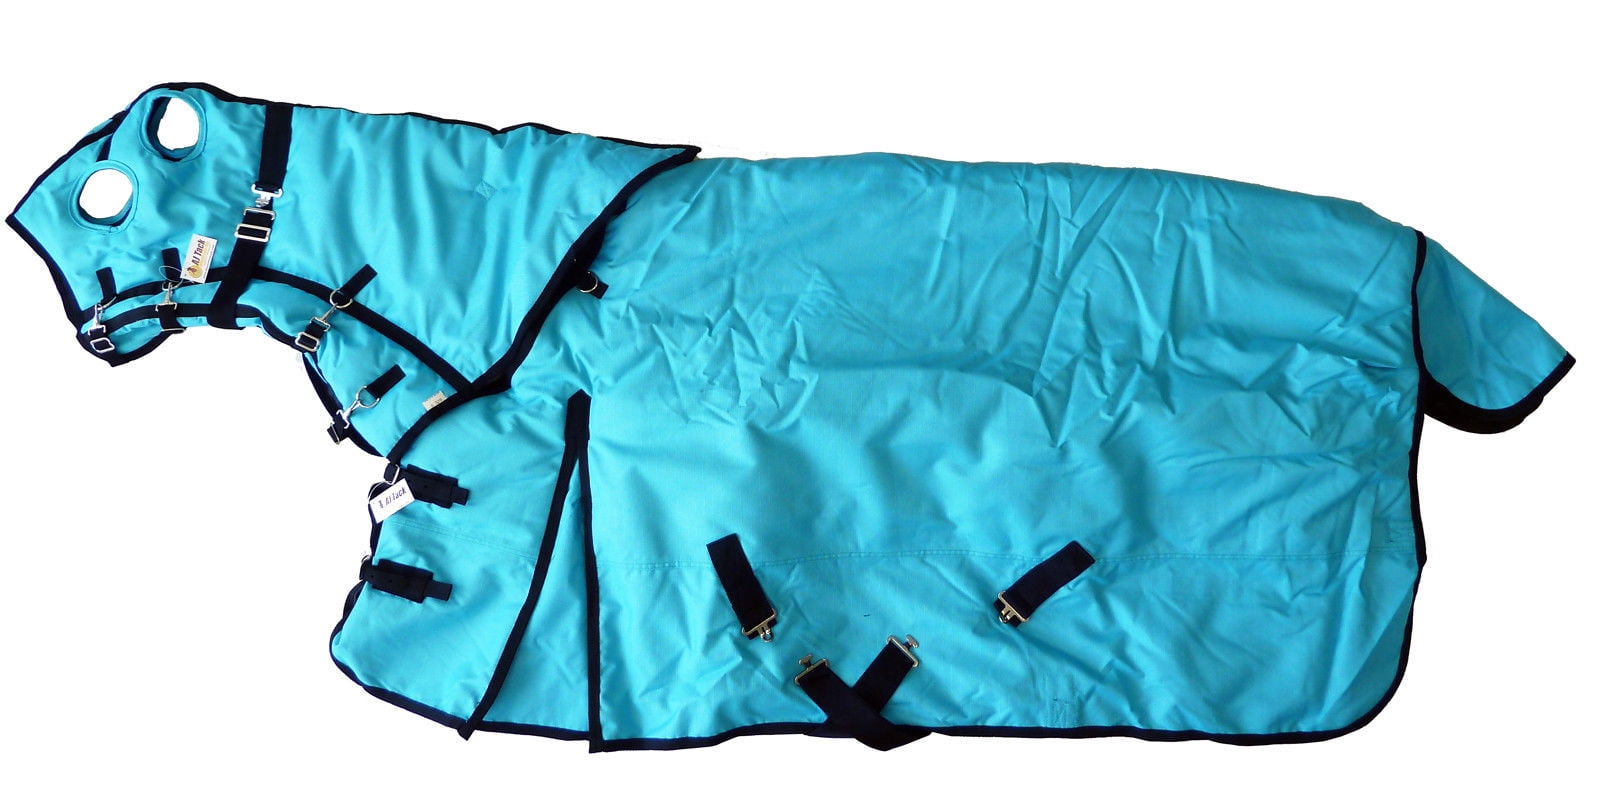 AJ Tack Wholesale Heavy Weight Horse Turnout Blanket 1200D Rip Stop Water Proof 